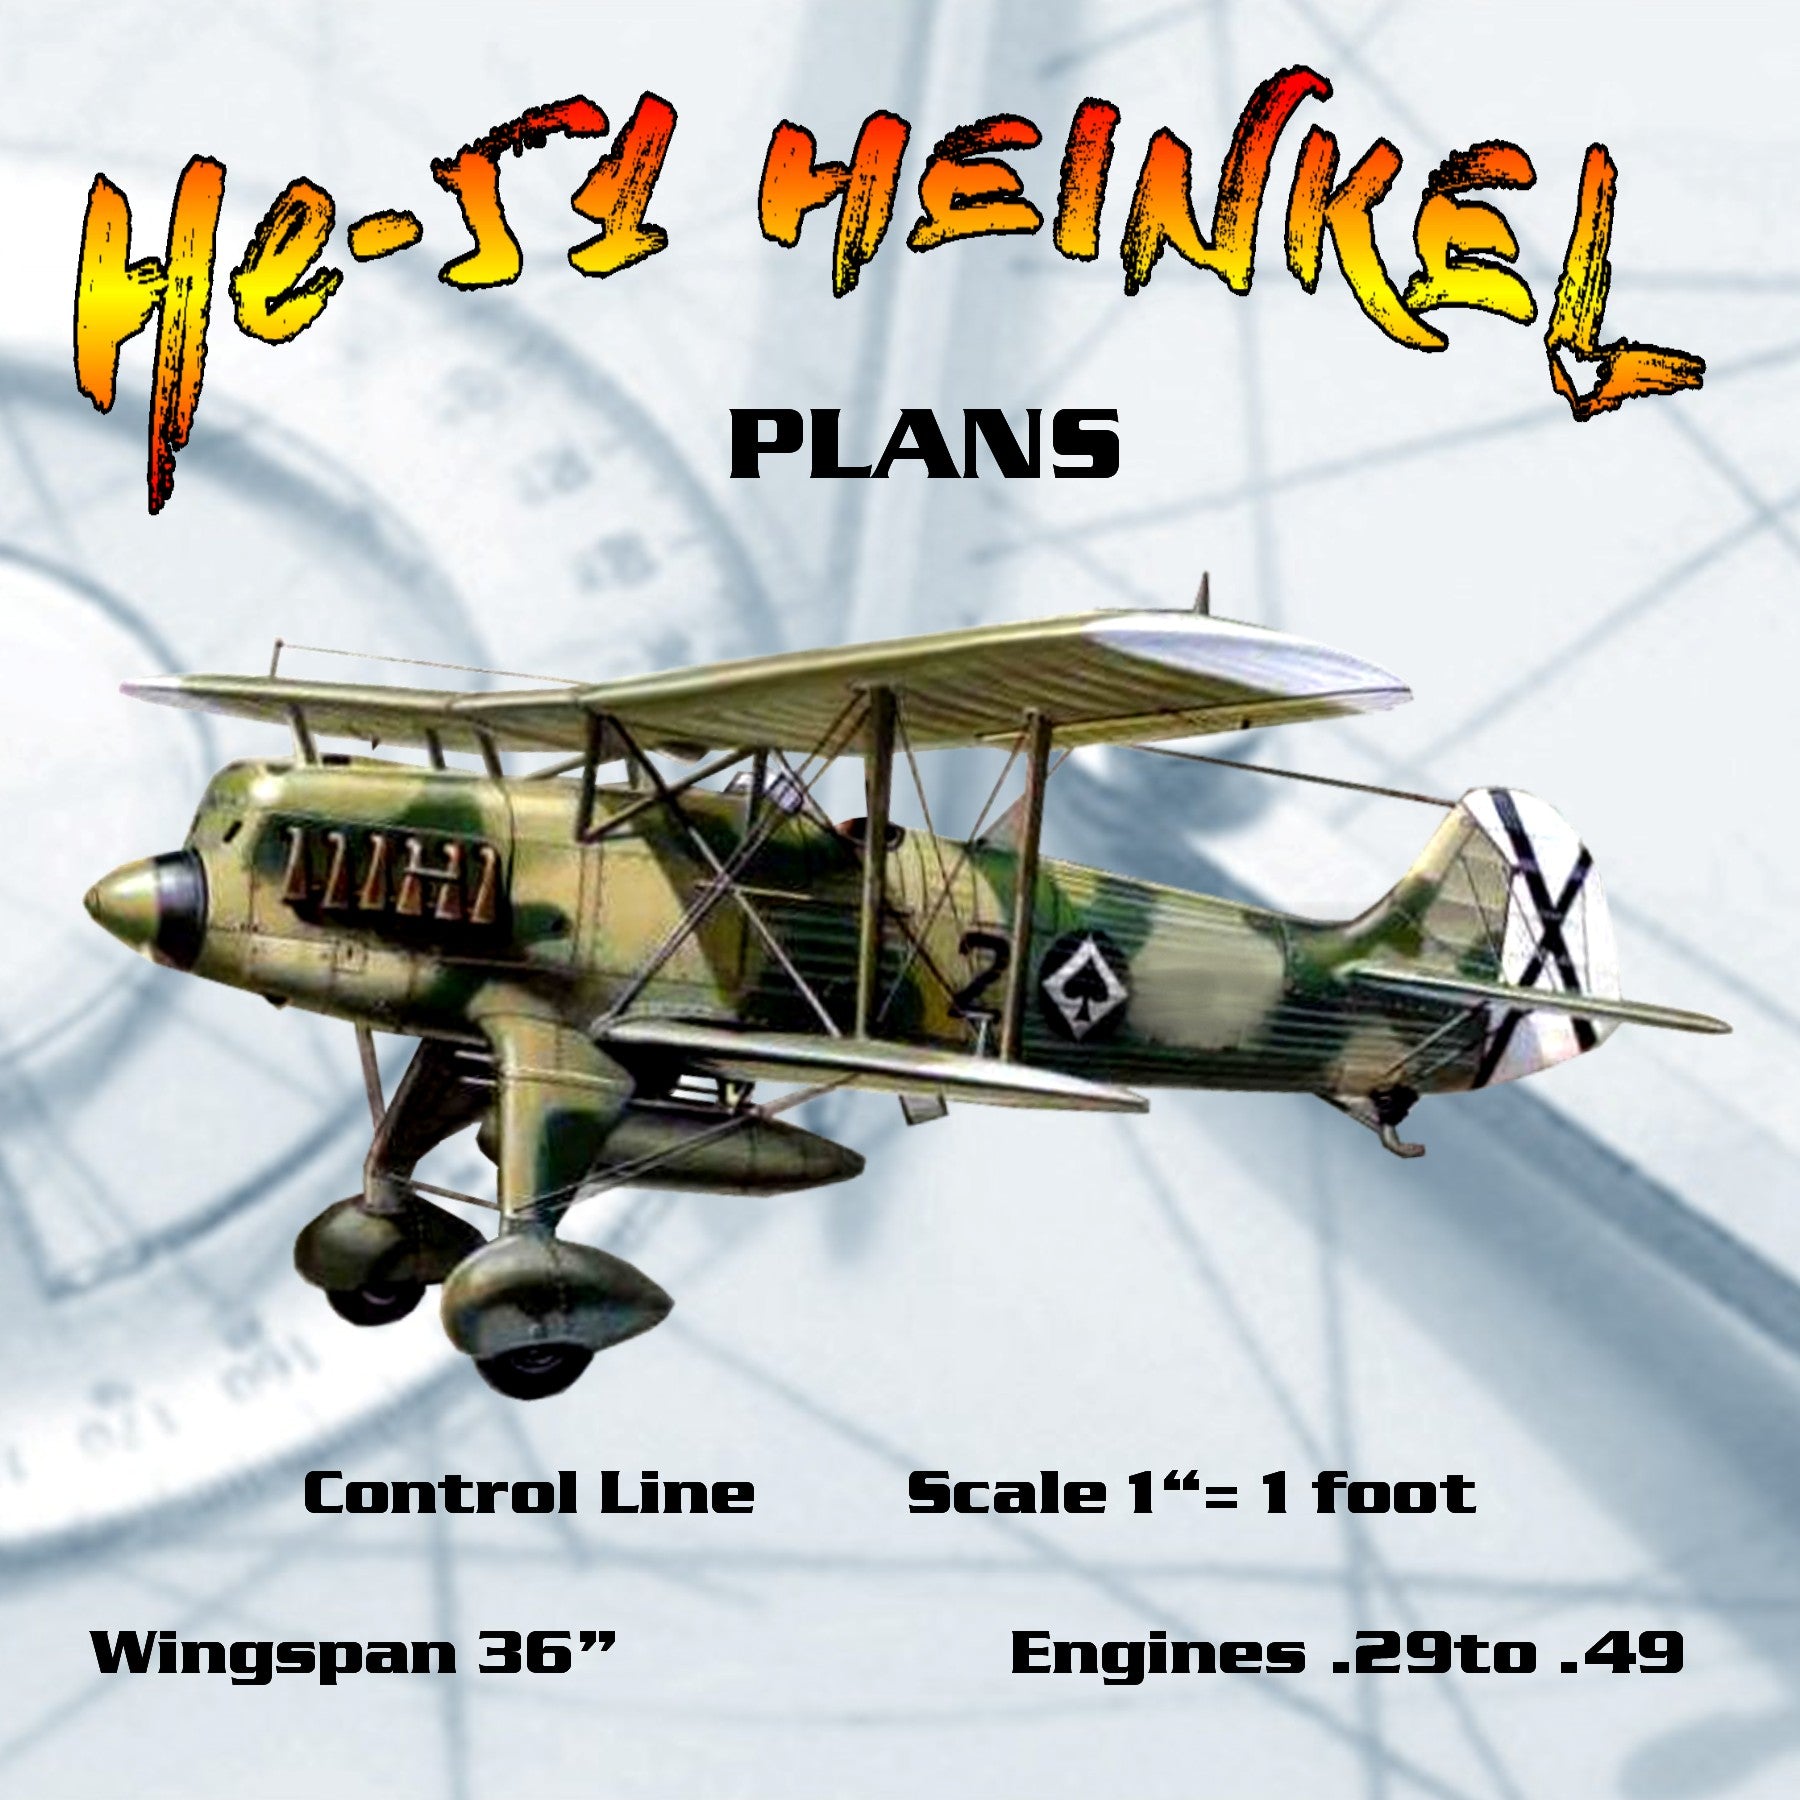 full size printed plans scale 1“= 1 foot control line he-51 wingspan 36”  engines .29 to .49